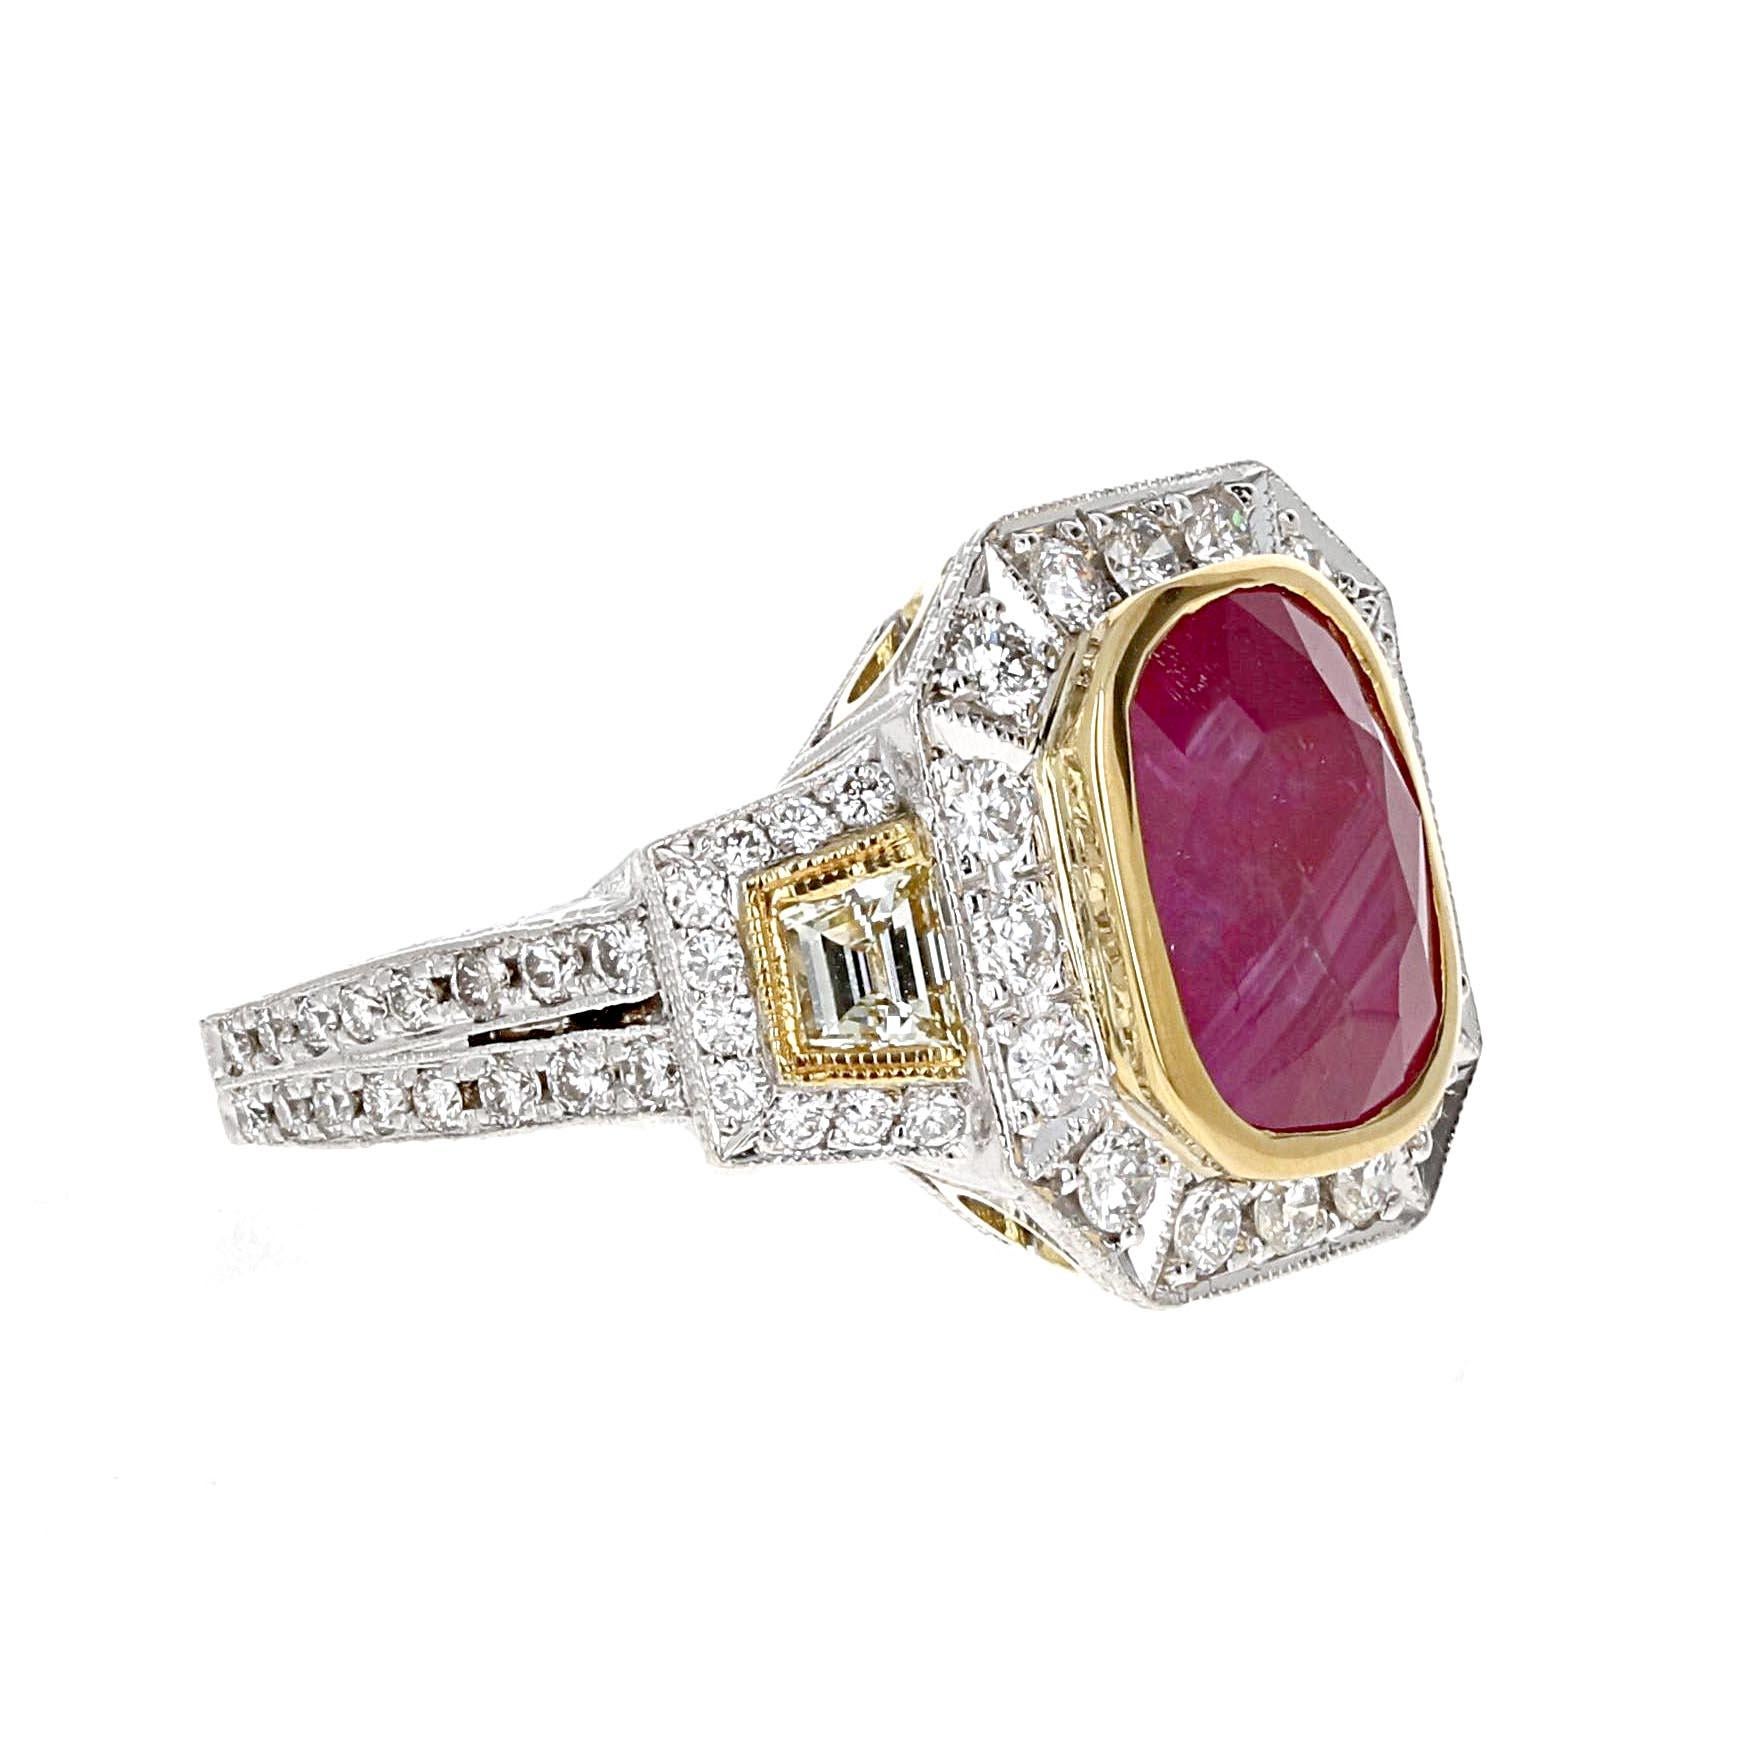 18k white and yellow gold three-stone cocktail vintage retro ring, with a vibrant GIA-certified, 6.15-carat cushion-shaped Burma Purplish Red Ruby. accompanied by two scintillating trilliant diamonds totaling 2.50 carats. These diamonds, carefully